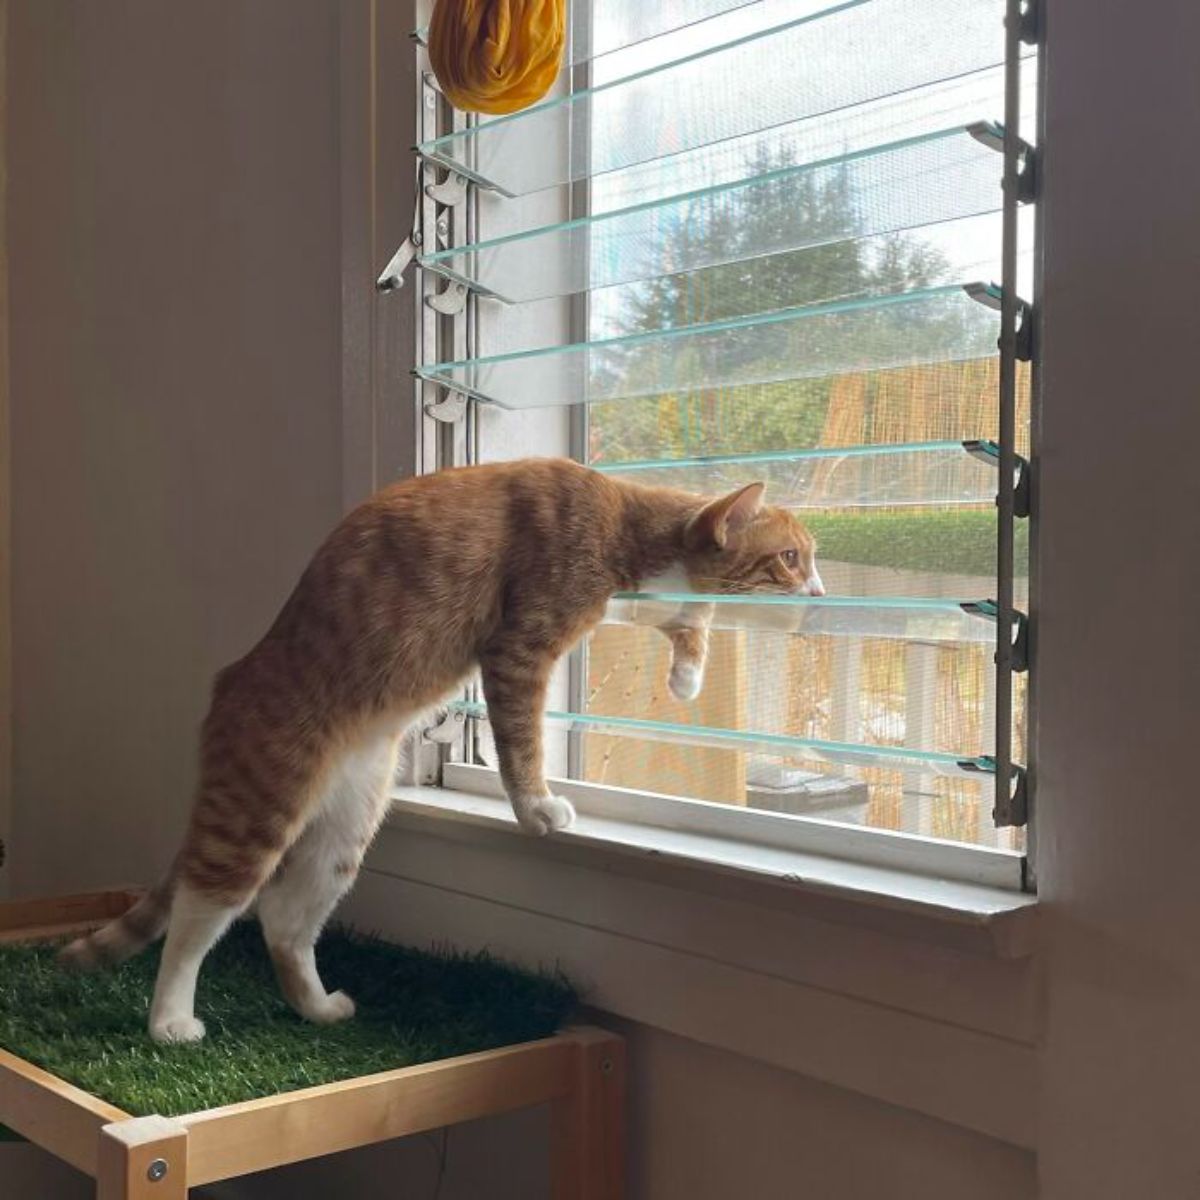 orange and white cat standing on hind legs with the head on the glass panel of a window looking outside intently